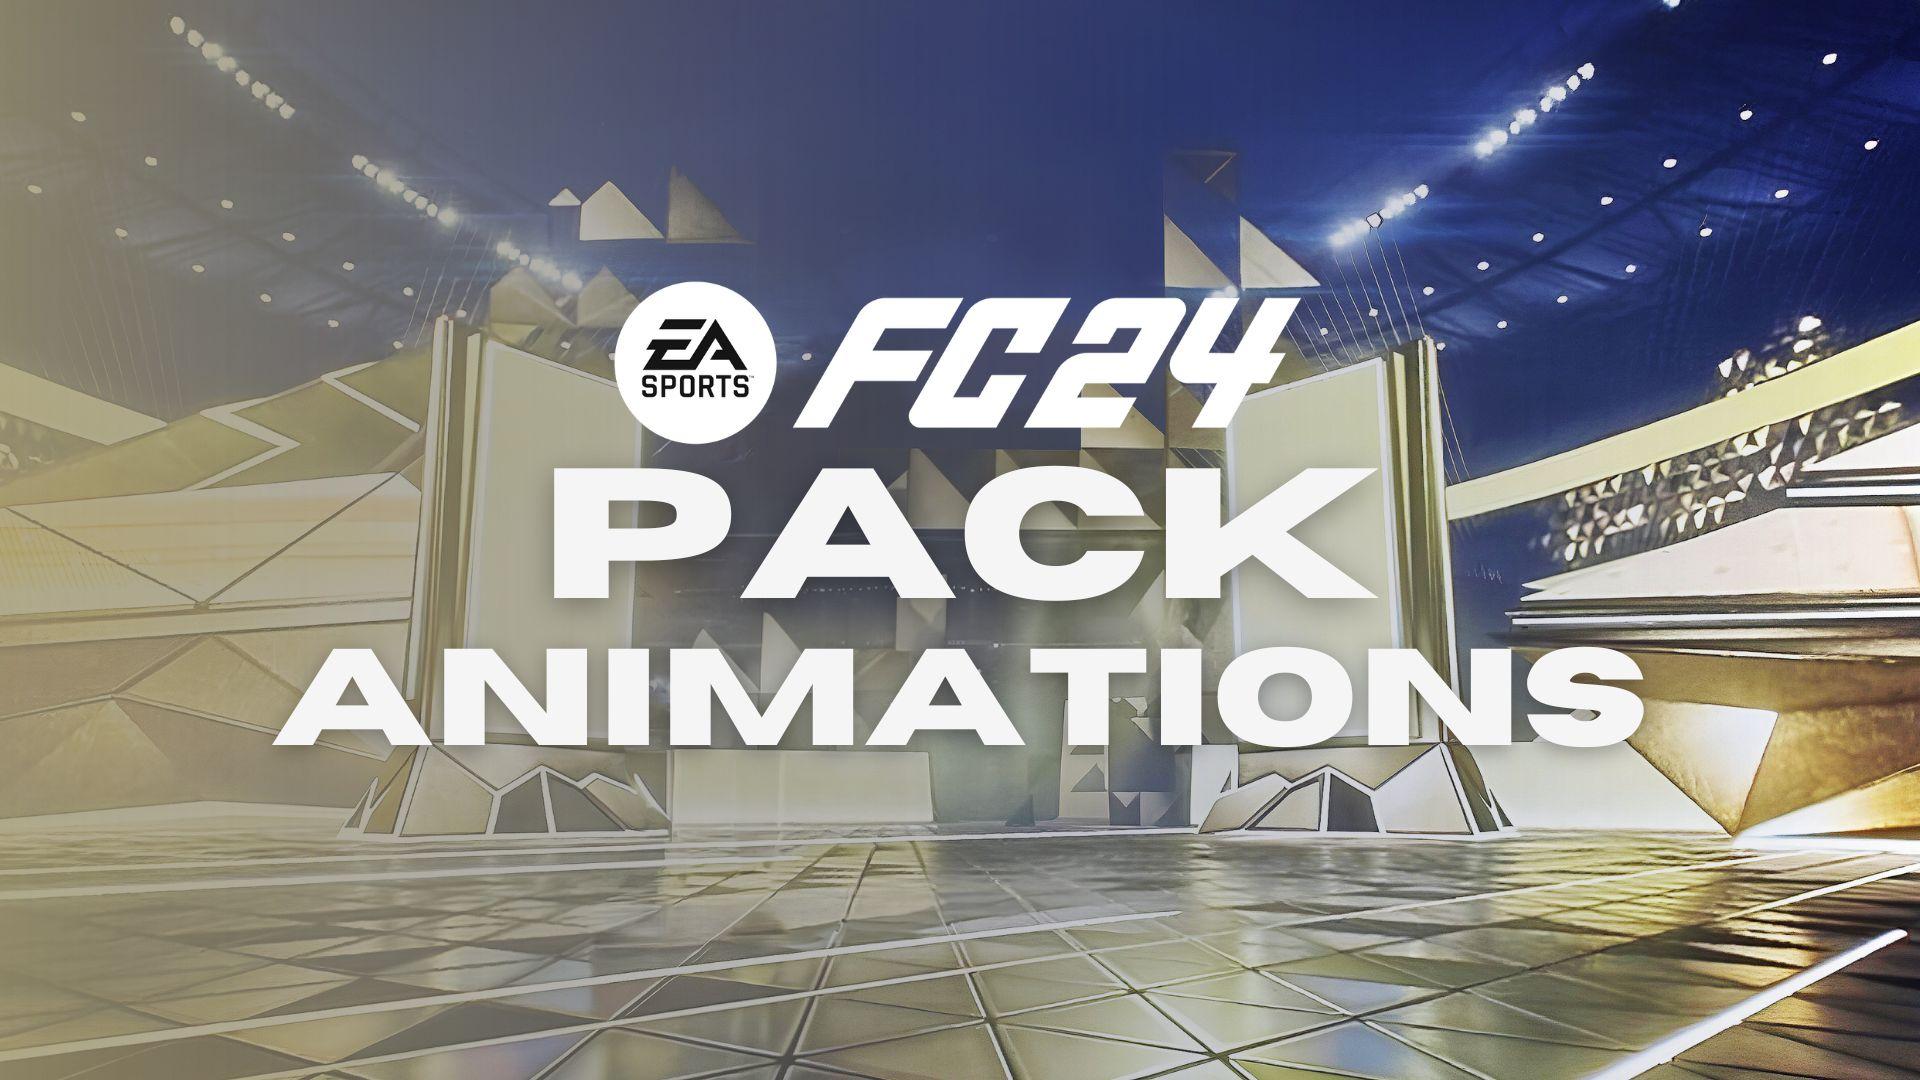 EA SPORTS FC pack animation with player walkout